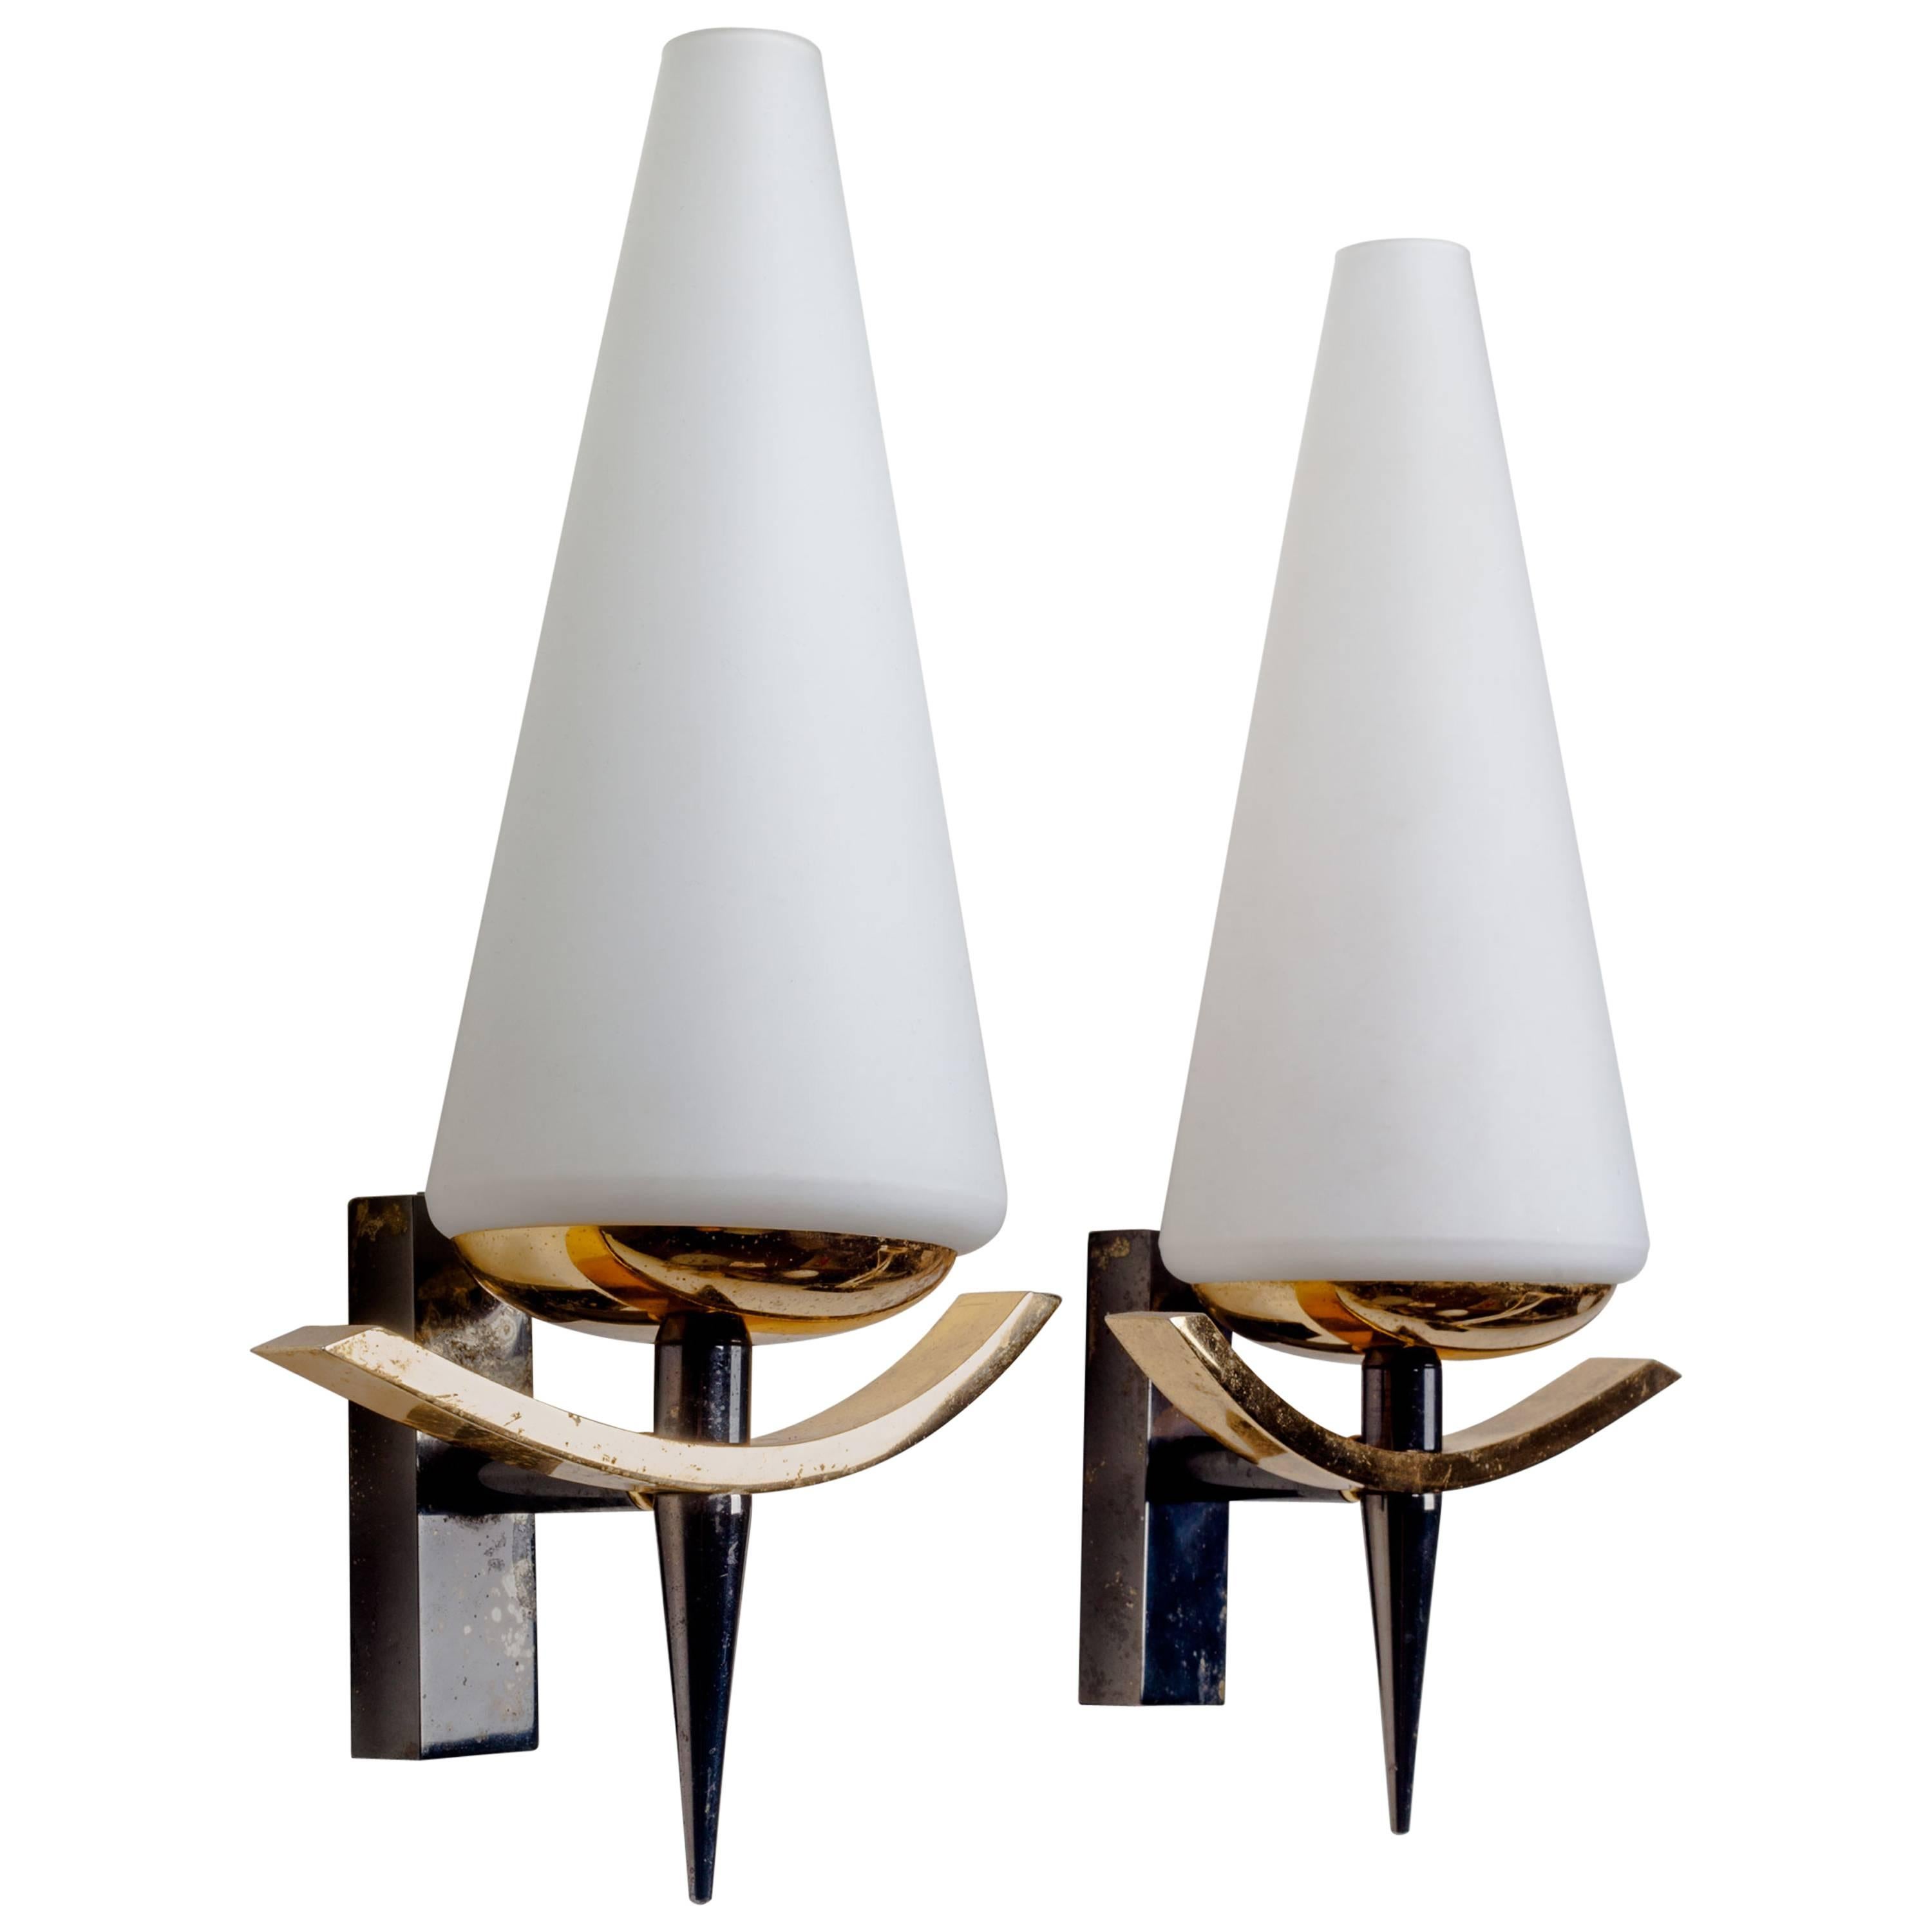 Vintage French Sconces by Arlus with Conic White Glass Shades and Brass, 1950s